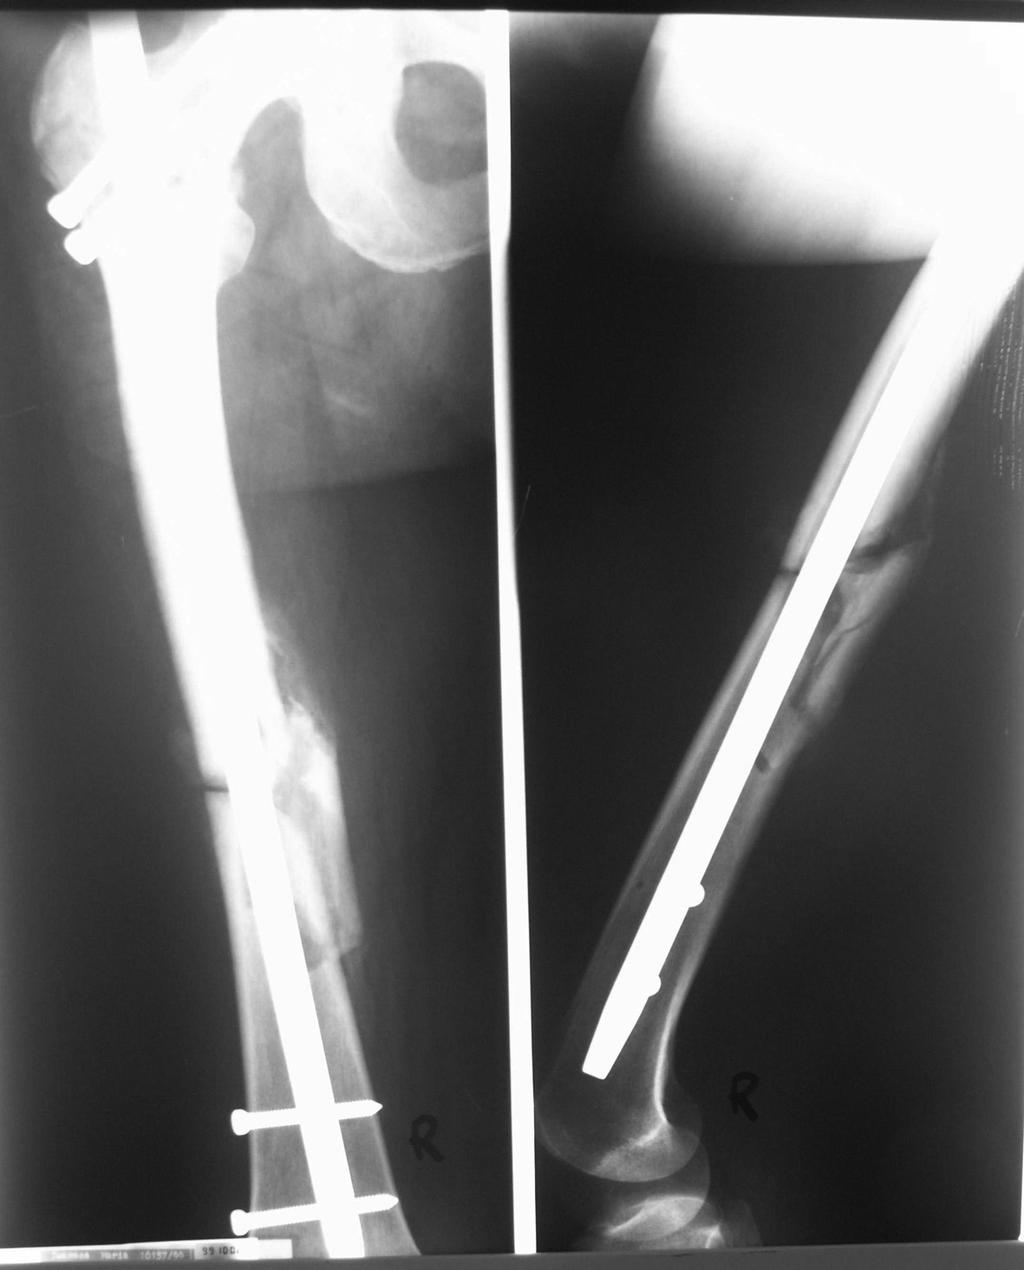 radiographs obtained after the injury.